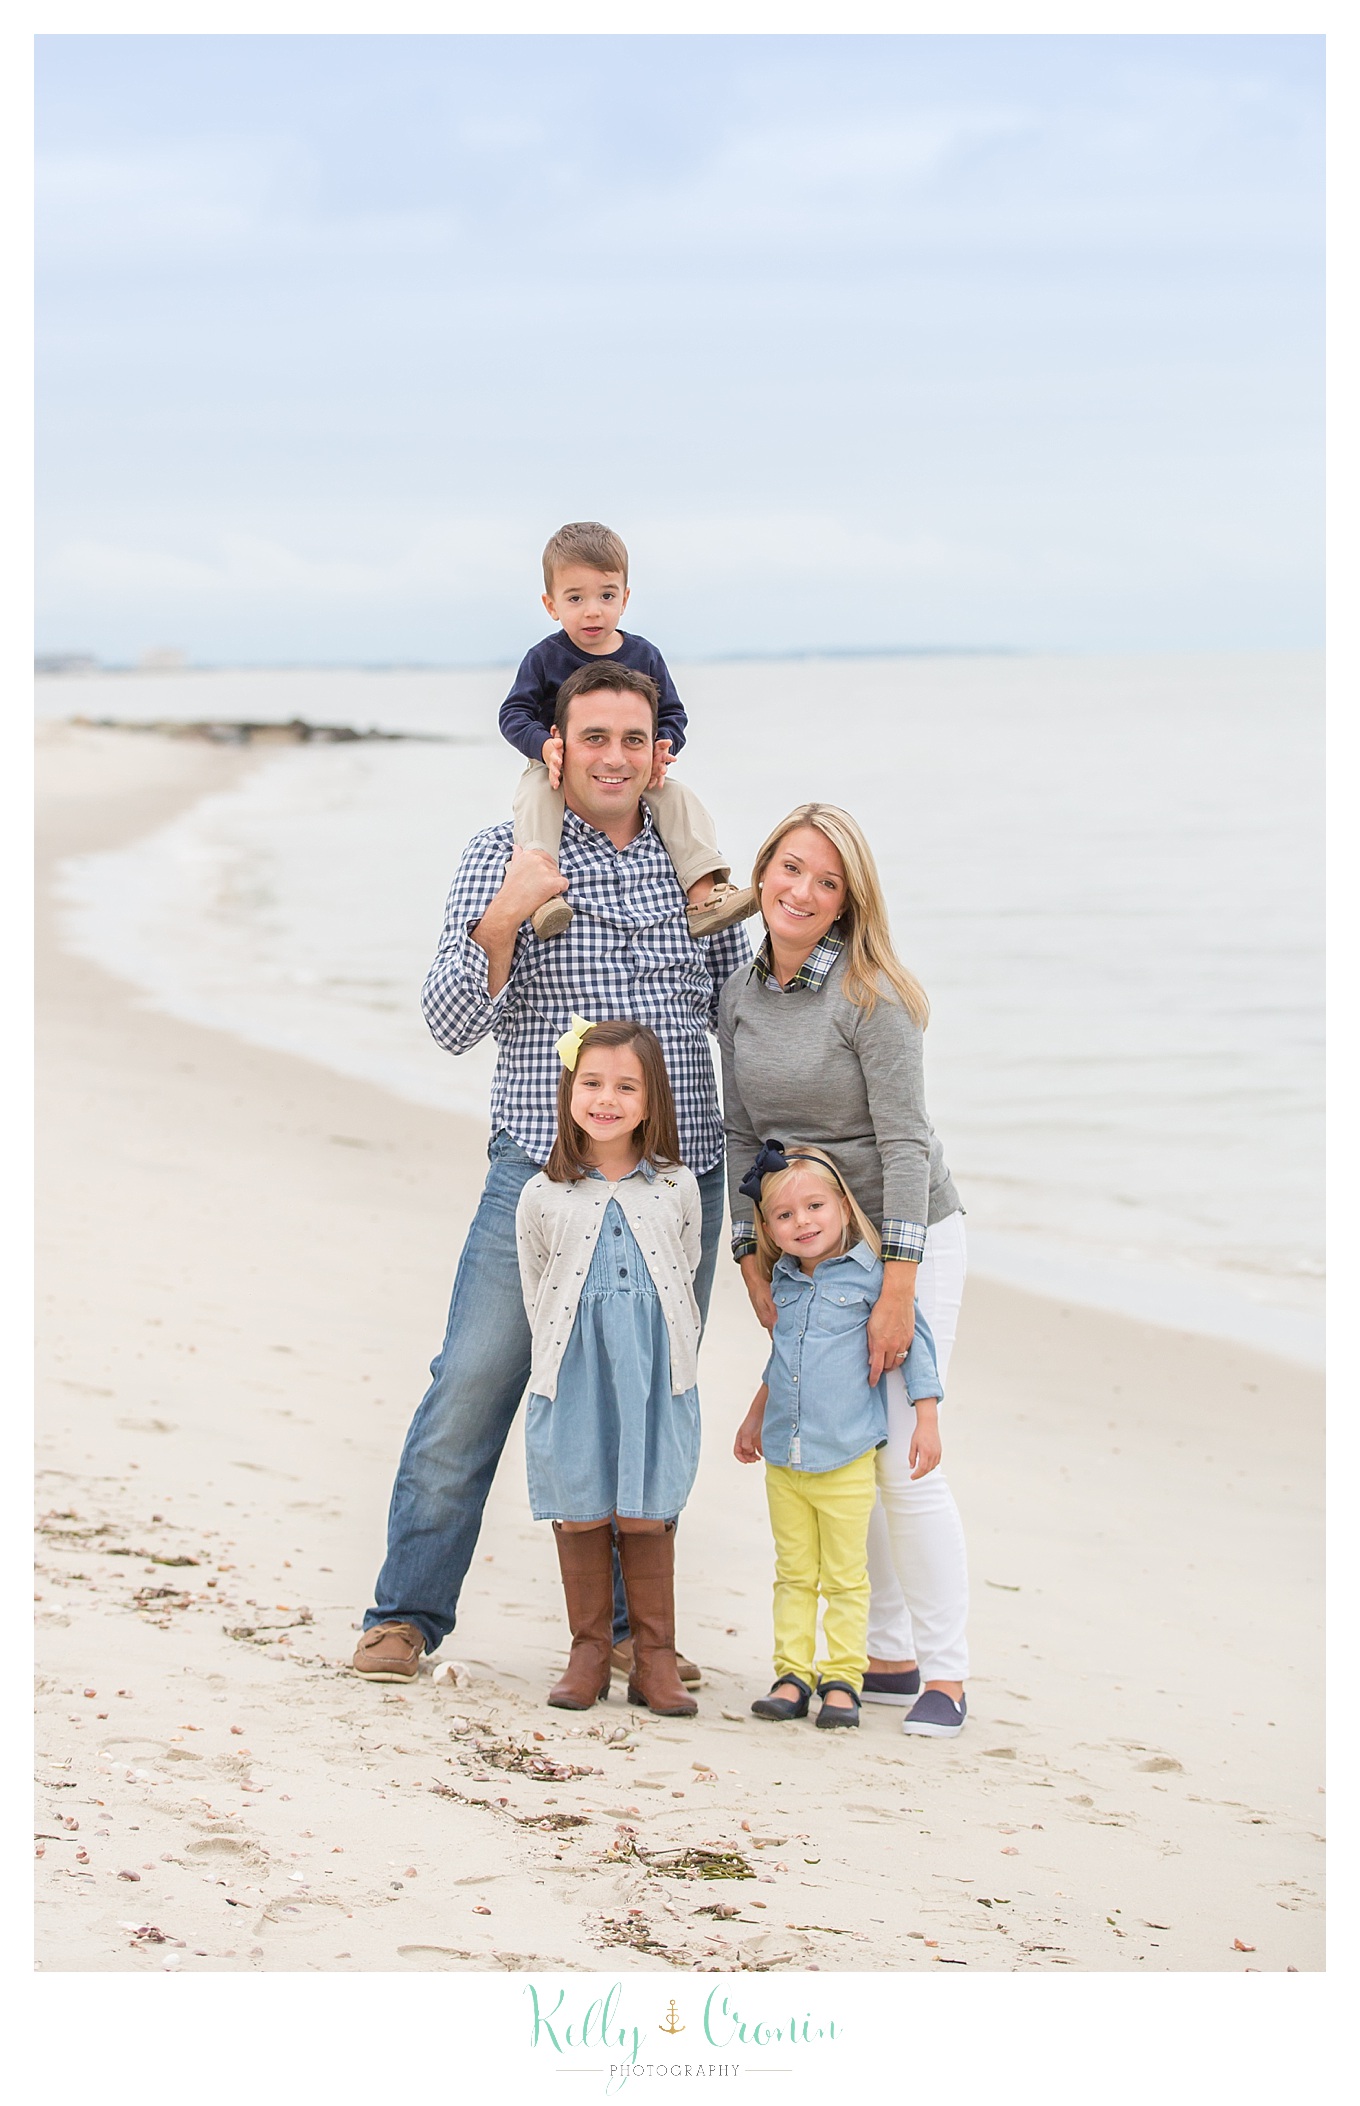 A family photographer captures a family standing on the beach.